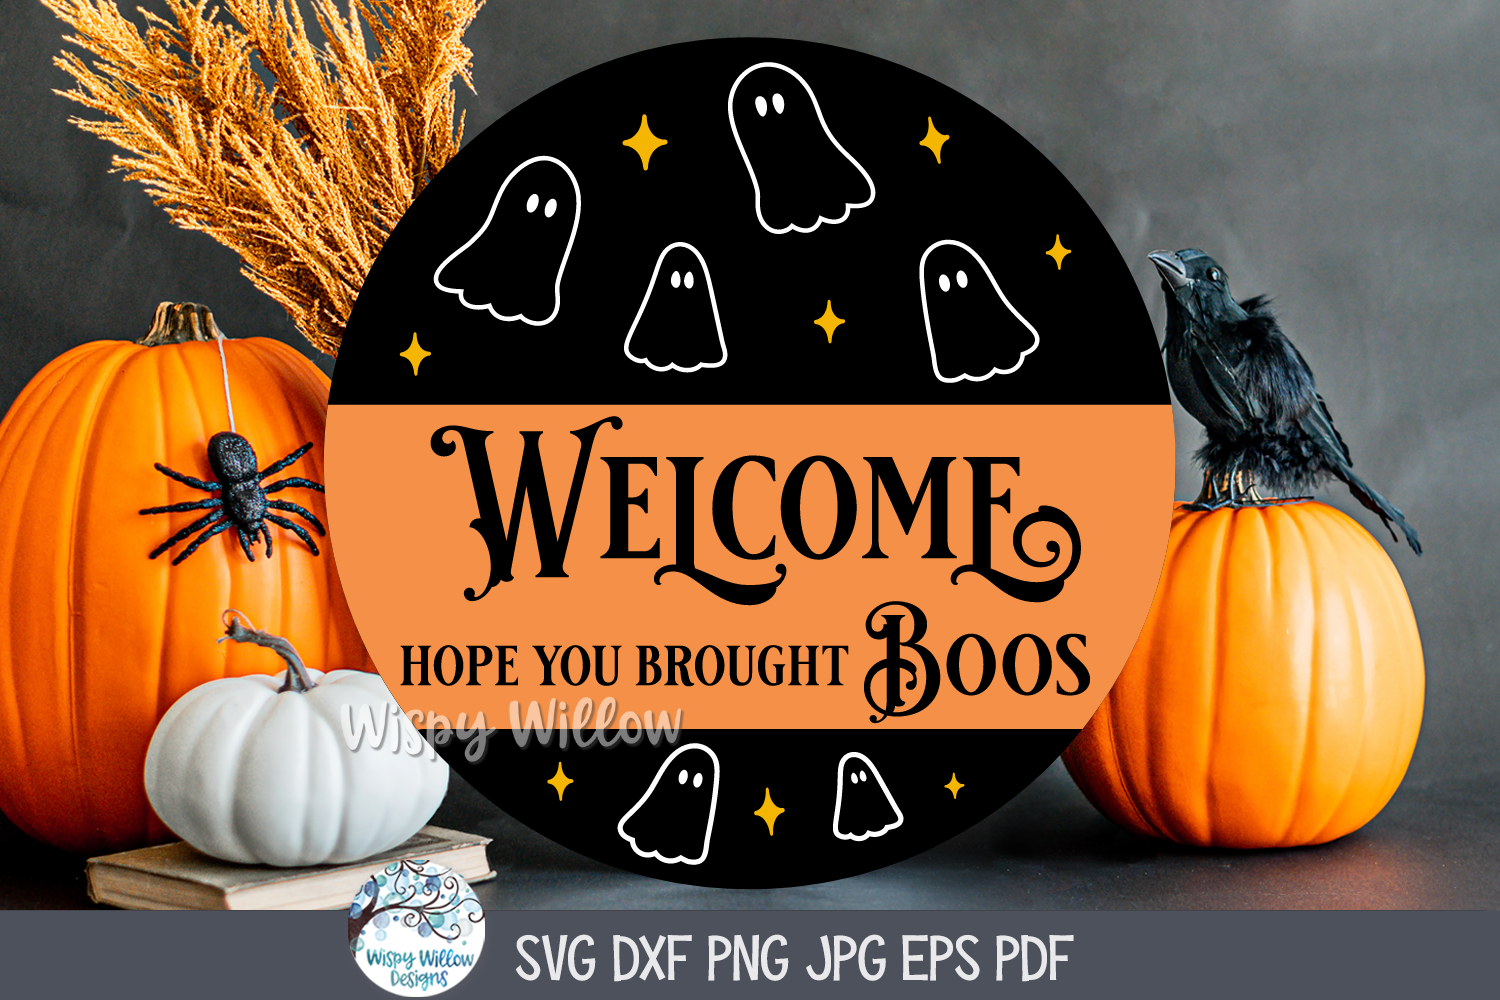 Welcome Hope You Brought Boos SVG | Festive Holiday Greeting